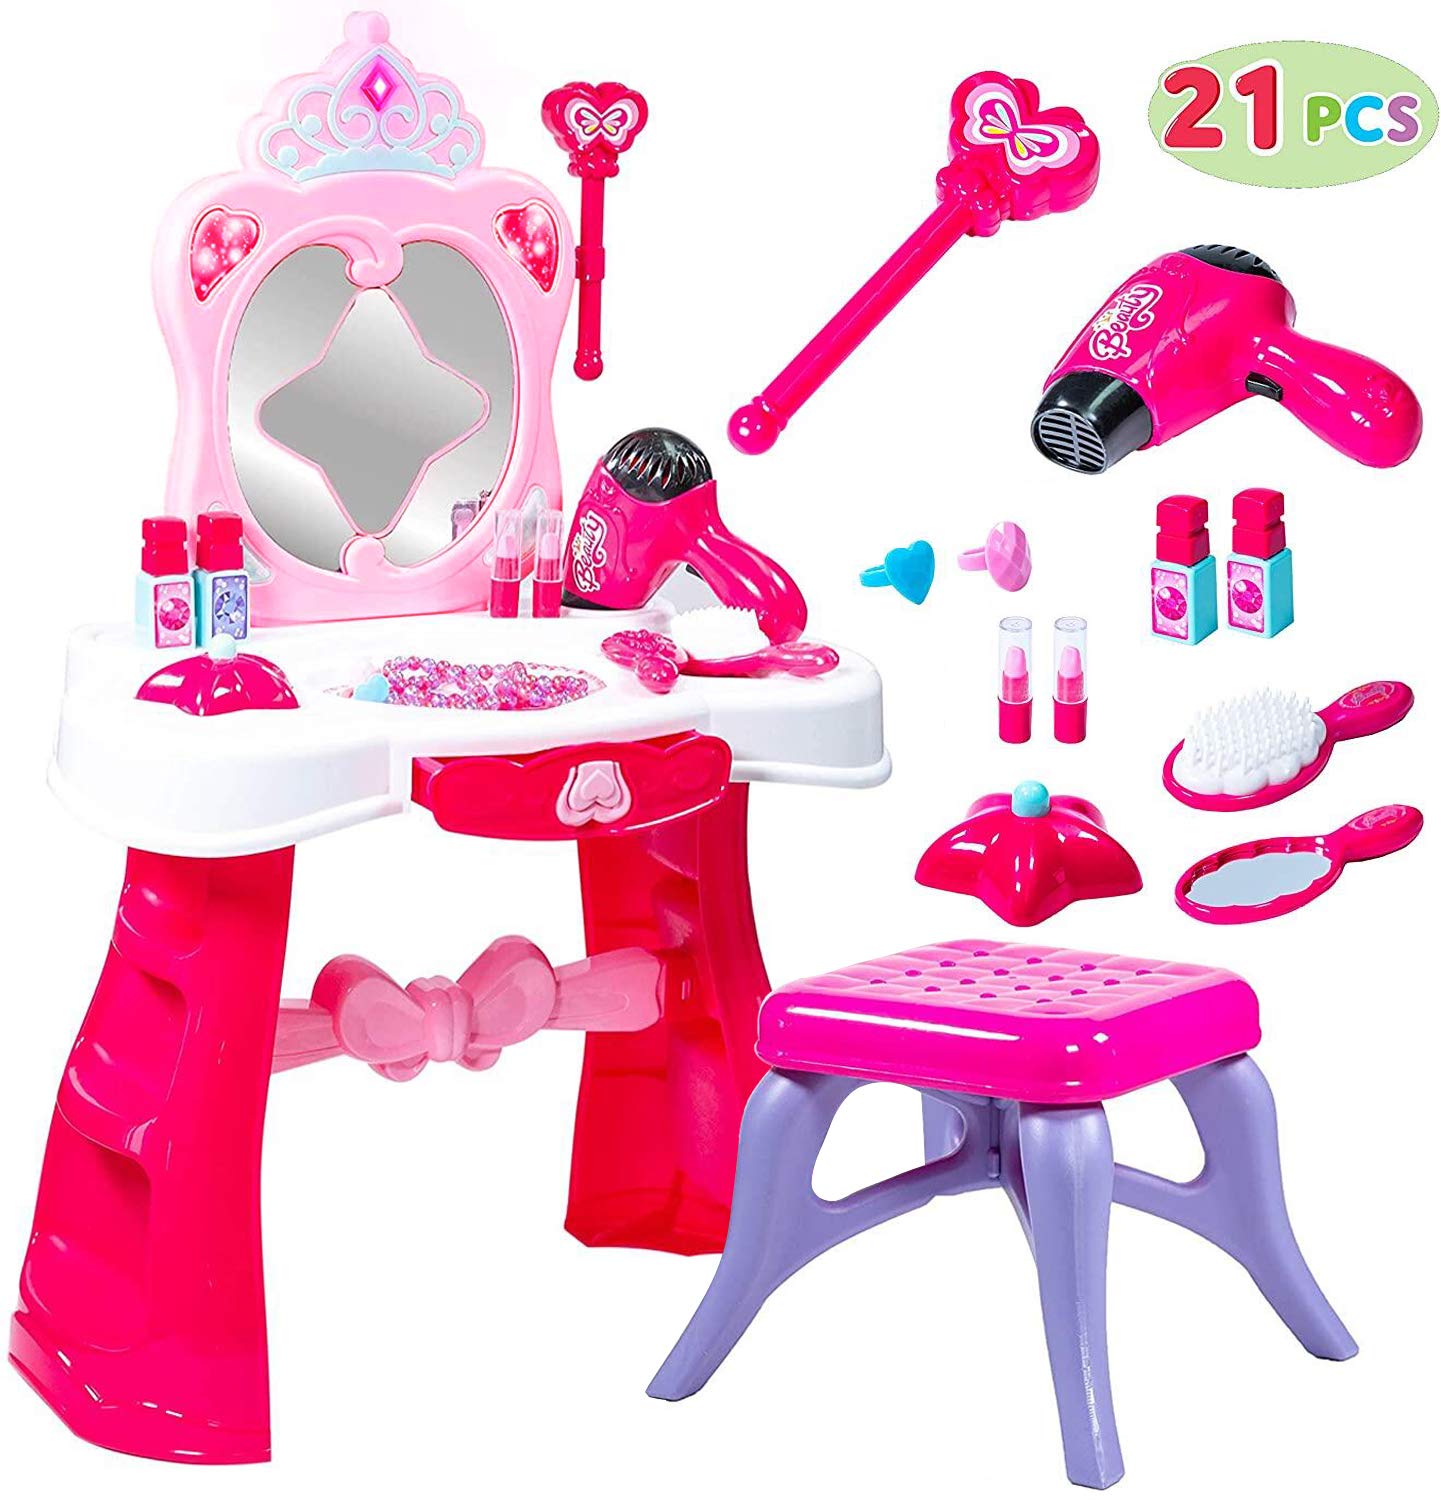 JOYIN Toddler Fantasy Vanity Beauty Dresser Table Play Set with Lights, Sounds, Chair, Fashion & Makeup Accessories for Kid and Pretend Play, Toy for 3,4,5 yrs Kids